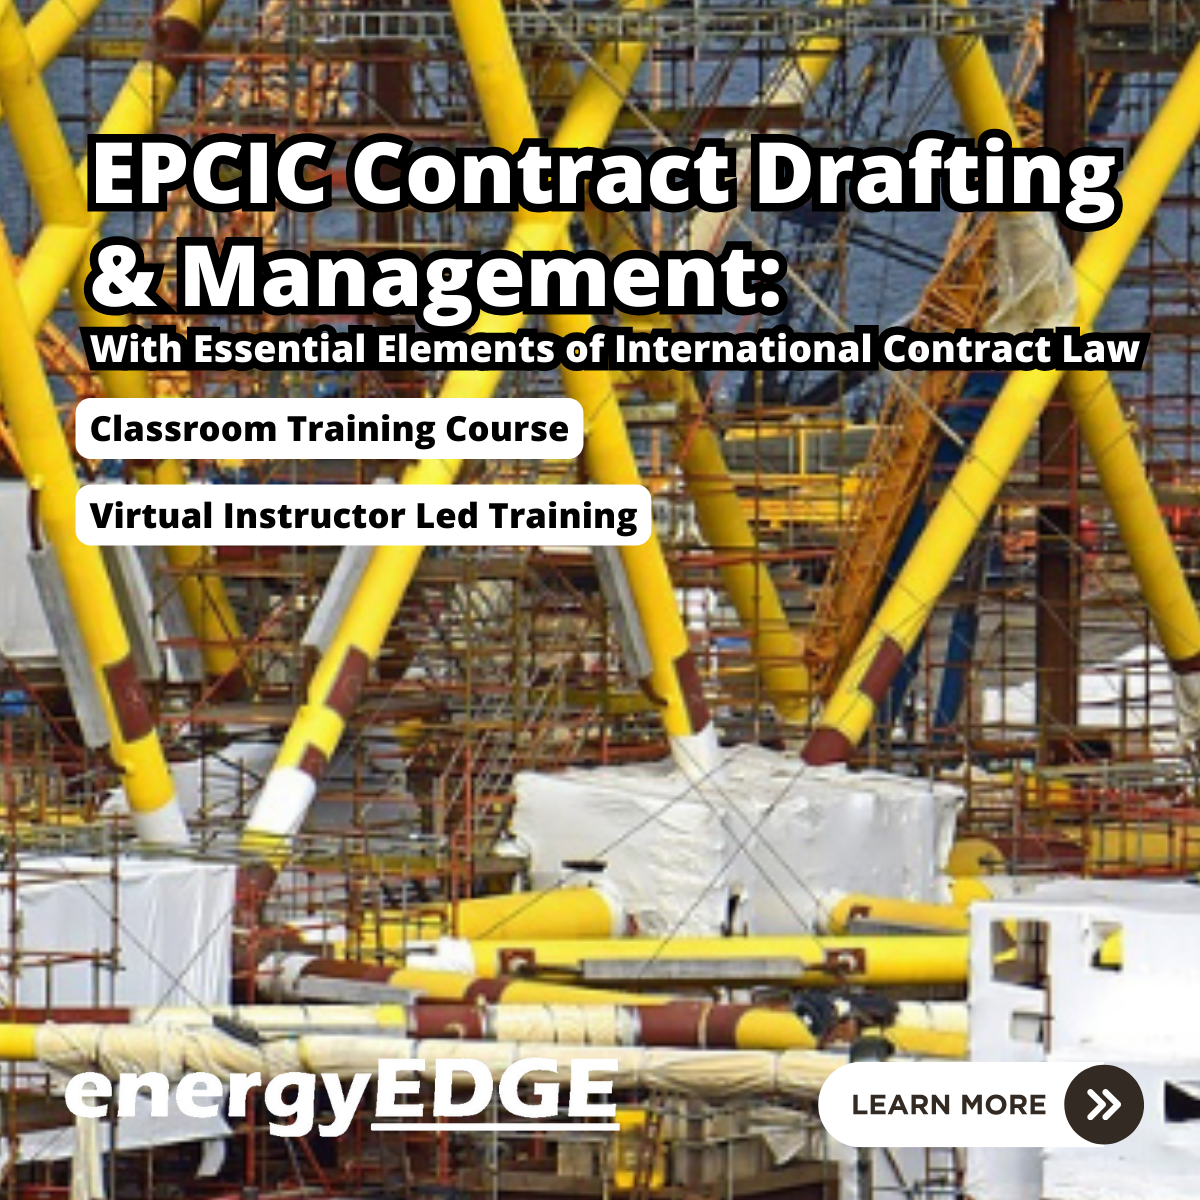 EPCIC Contract Drafting and Management: With Essential Elements of International Contract Laws